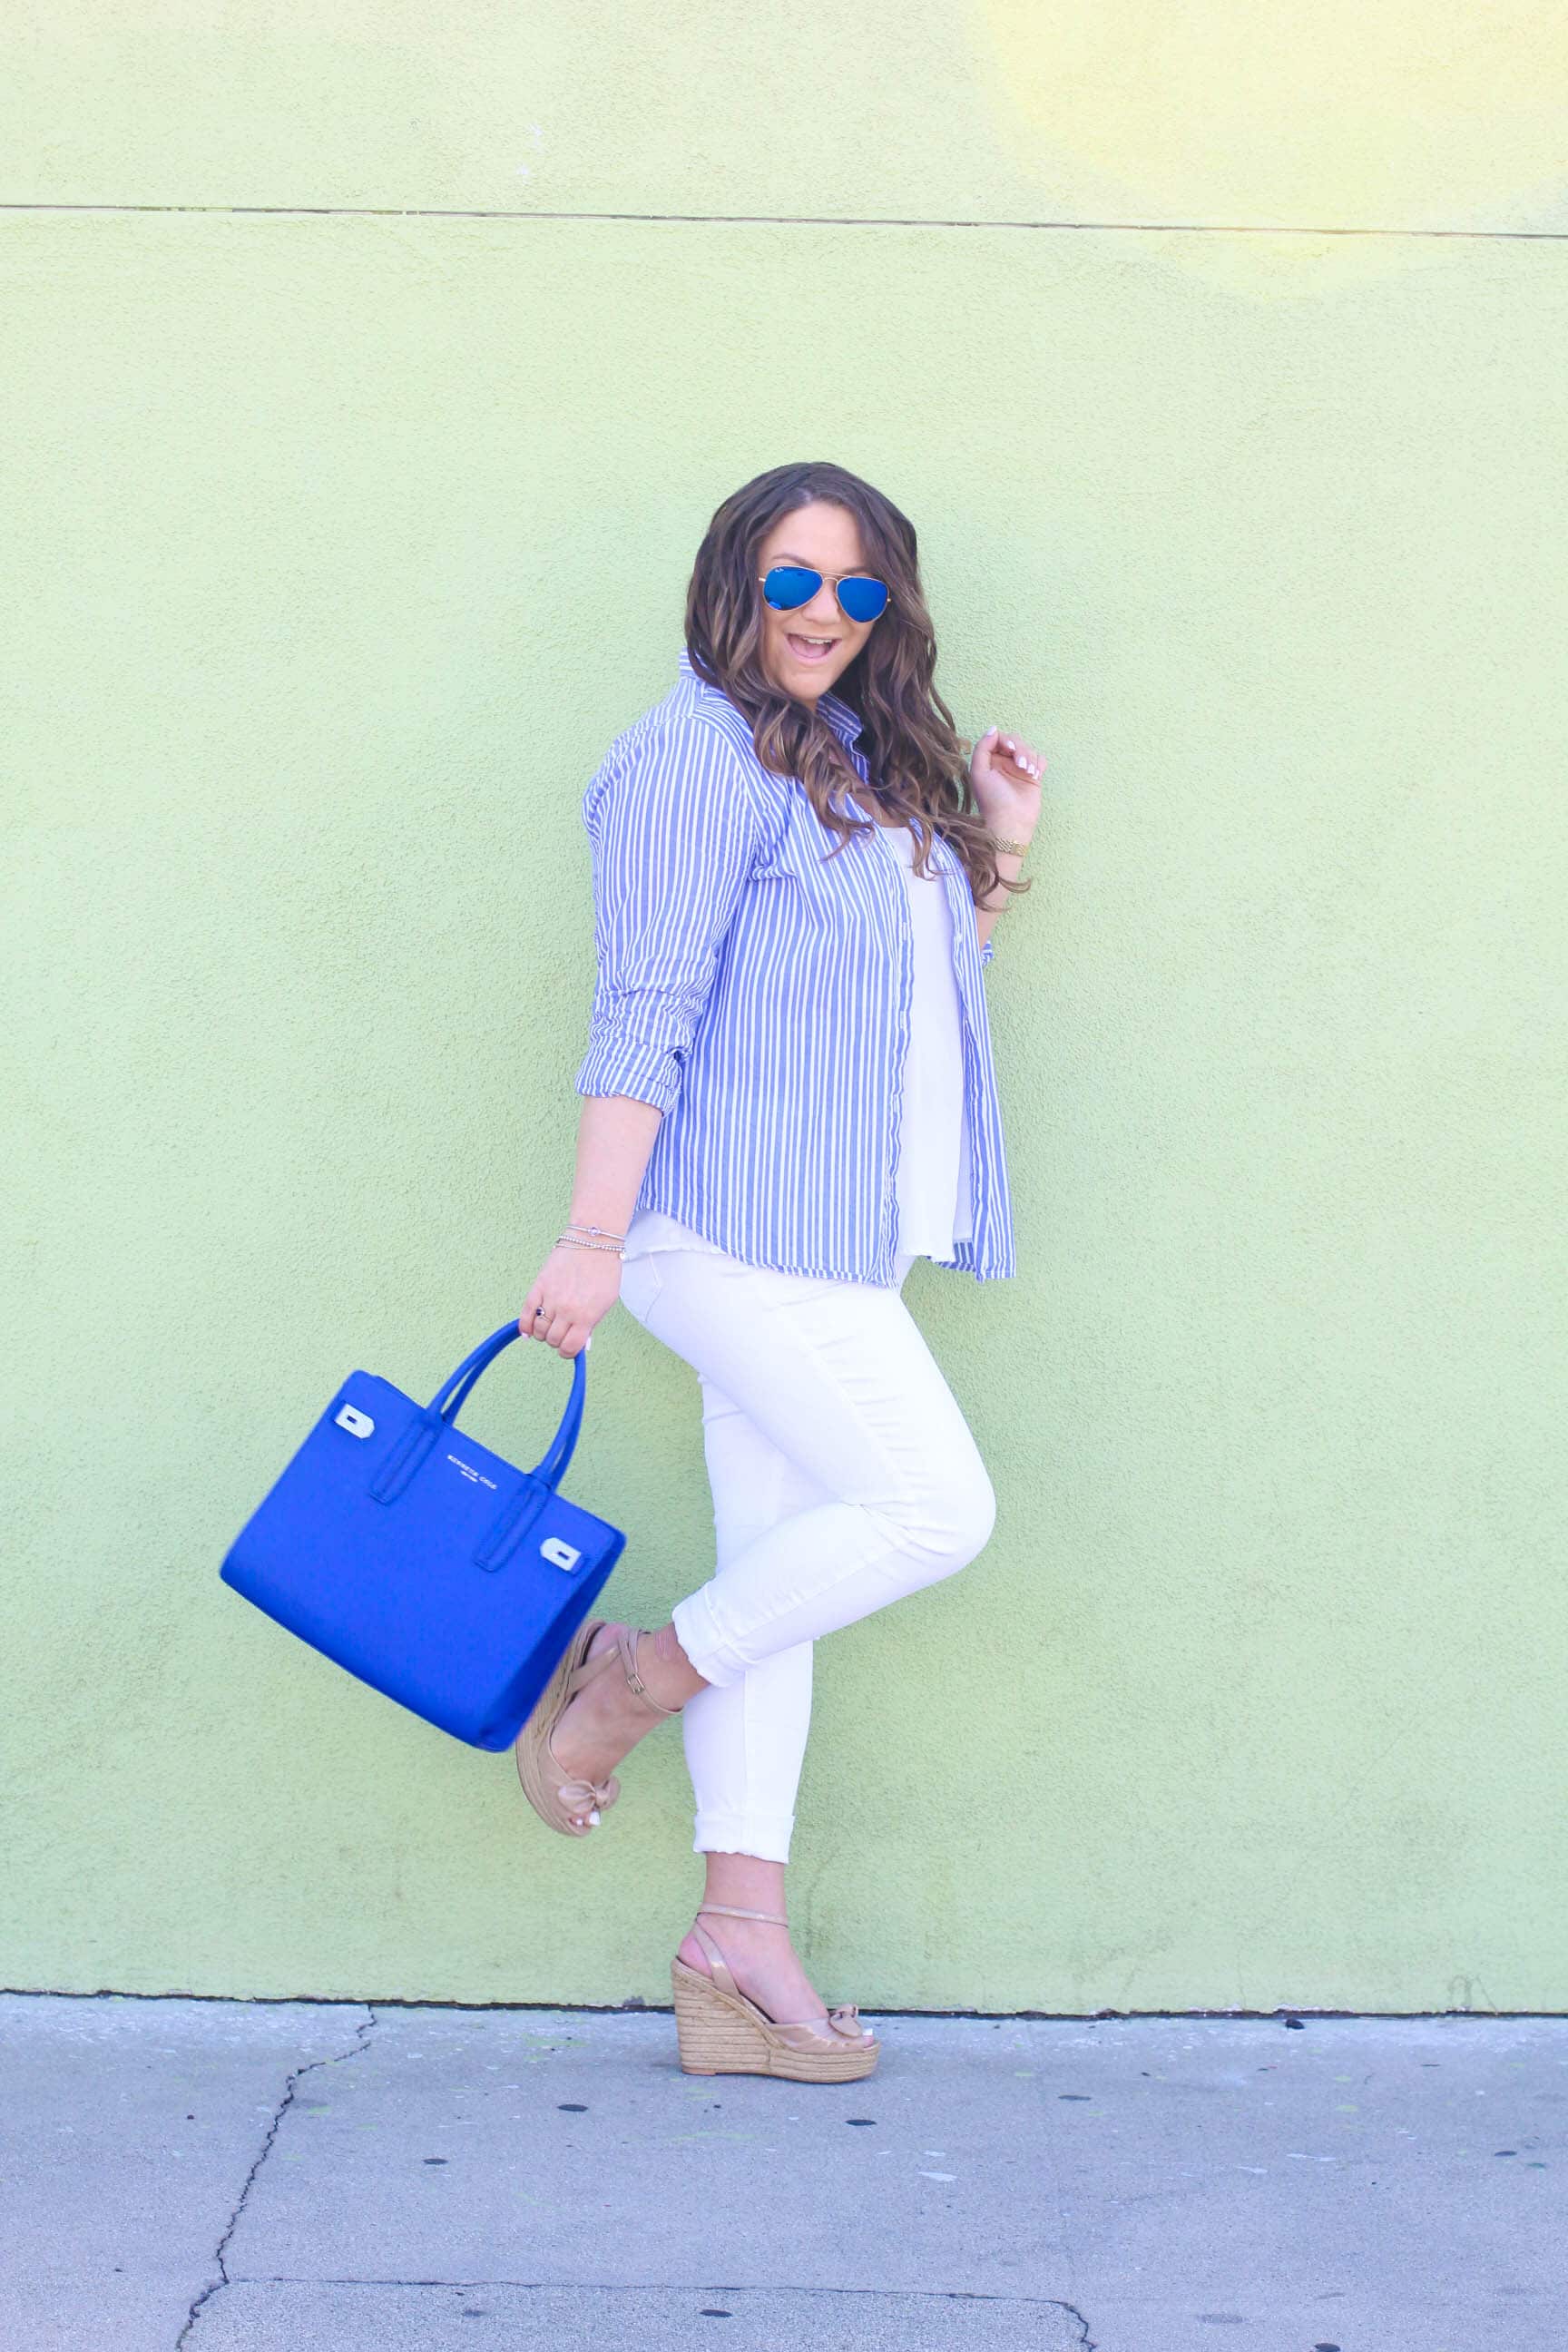 missyonmadison, melissa tierney, old navy, fashion blogger, spring style, spring trends, old navy style, fashion blogger, la blogger, neo nauticaul, nautical, white skinny jeans, white jeans, cobalt blue satchel, pin stripe shirt, striped button down, style blogger, espadrille wedges, style goals, old navy rockstar jeans,